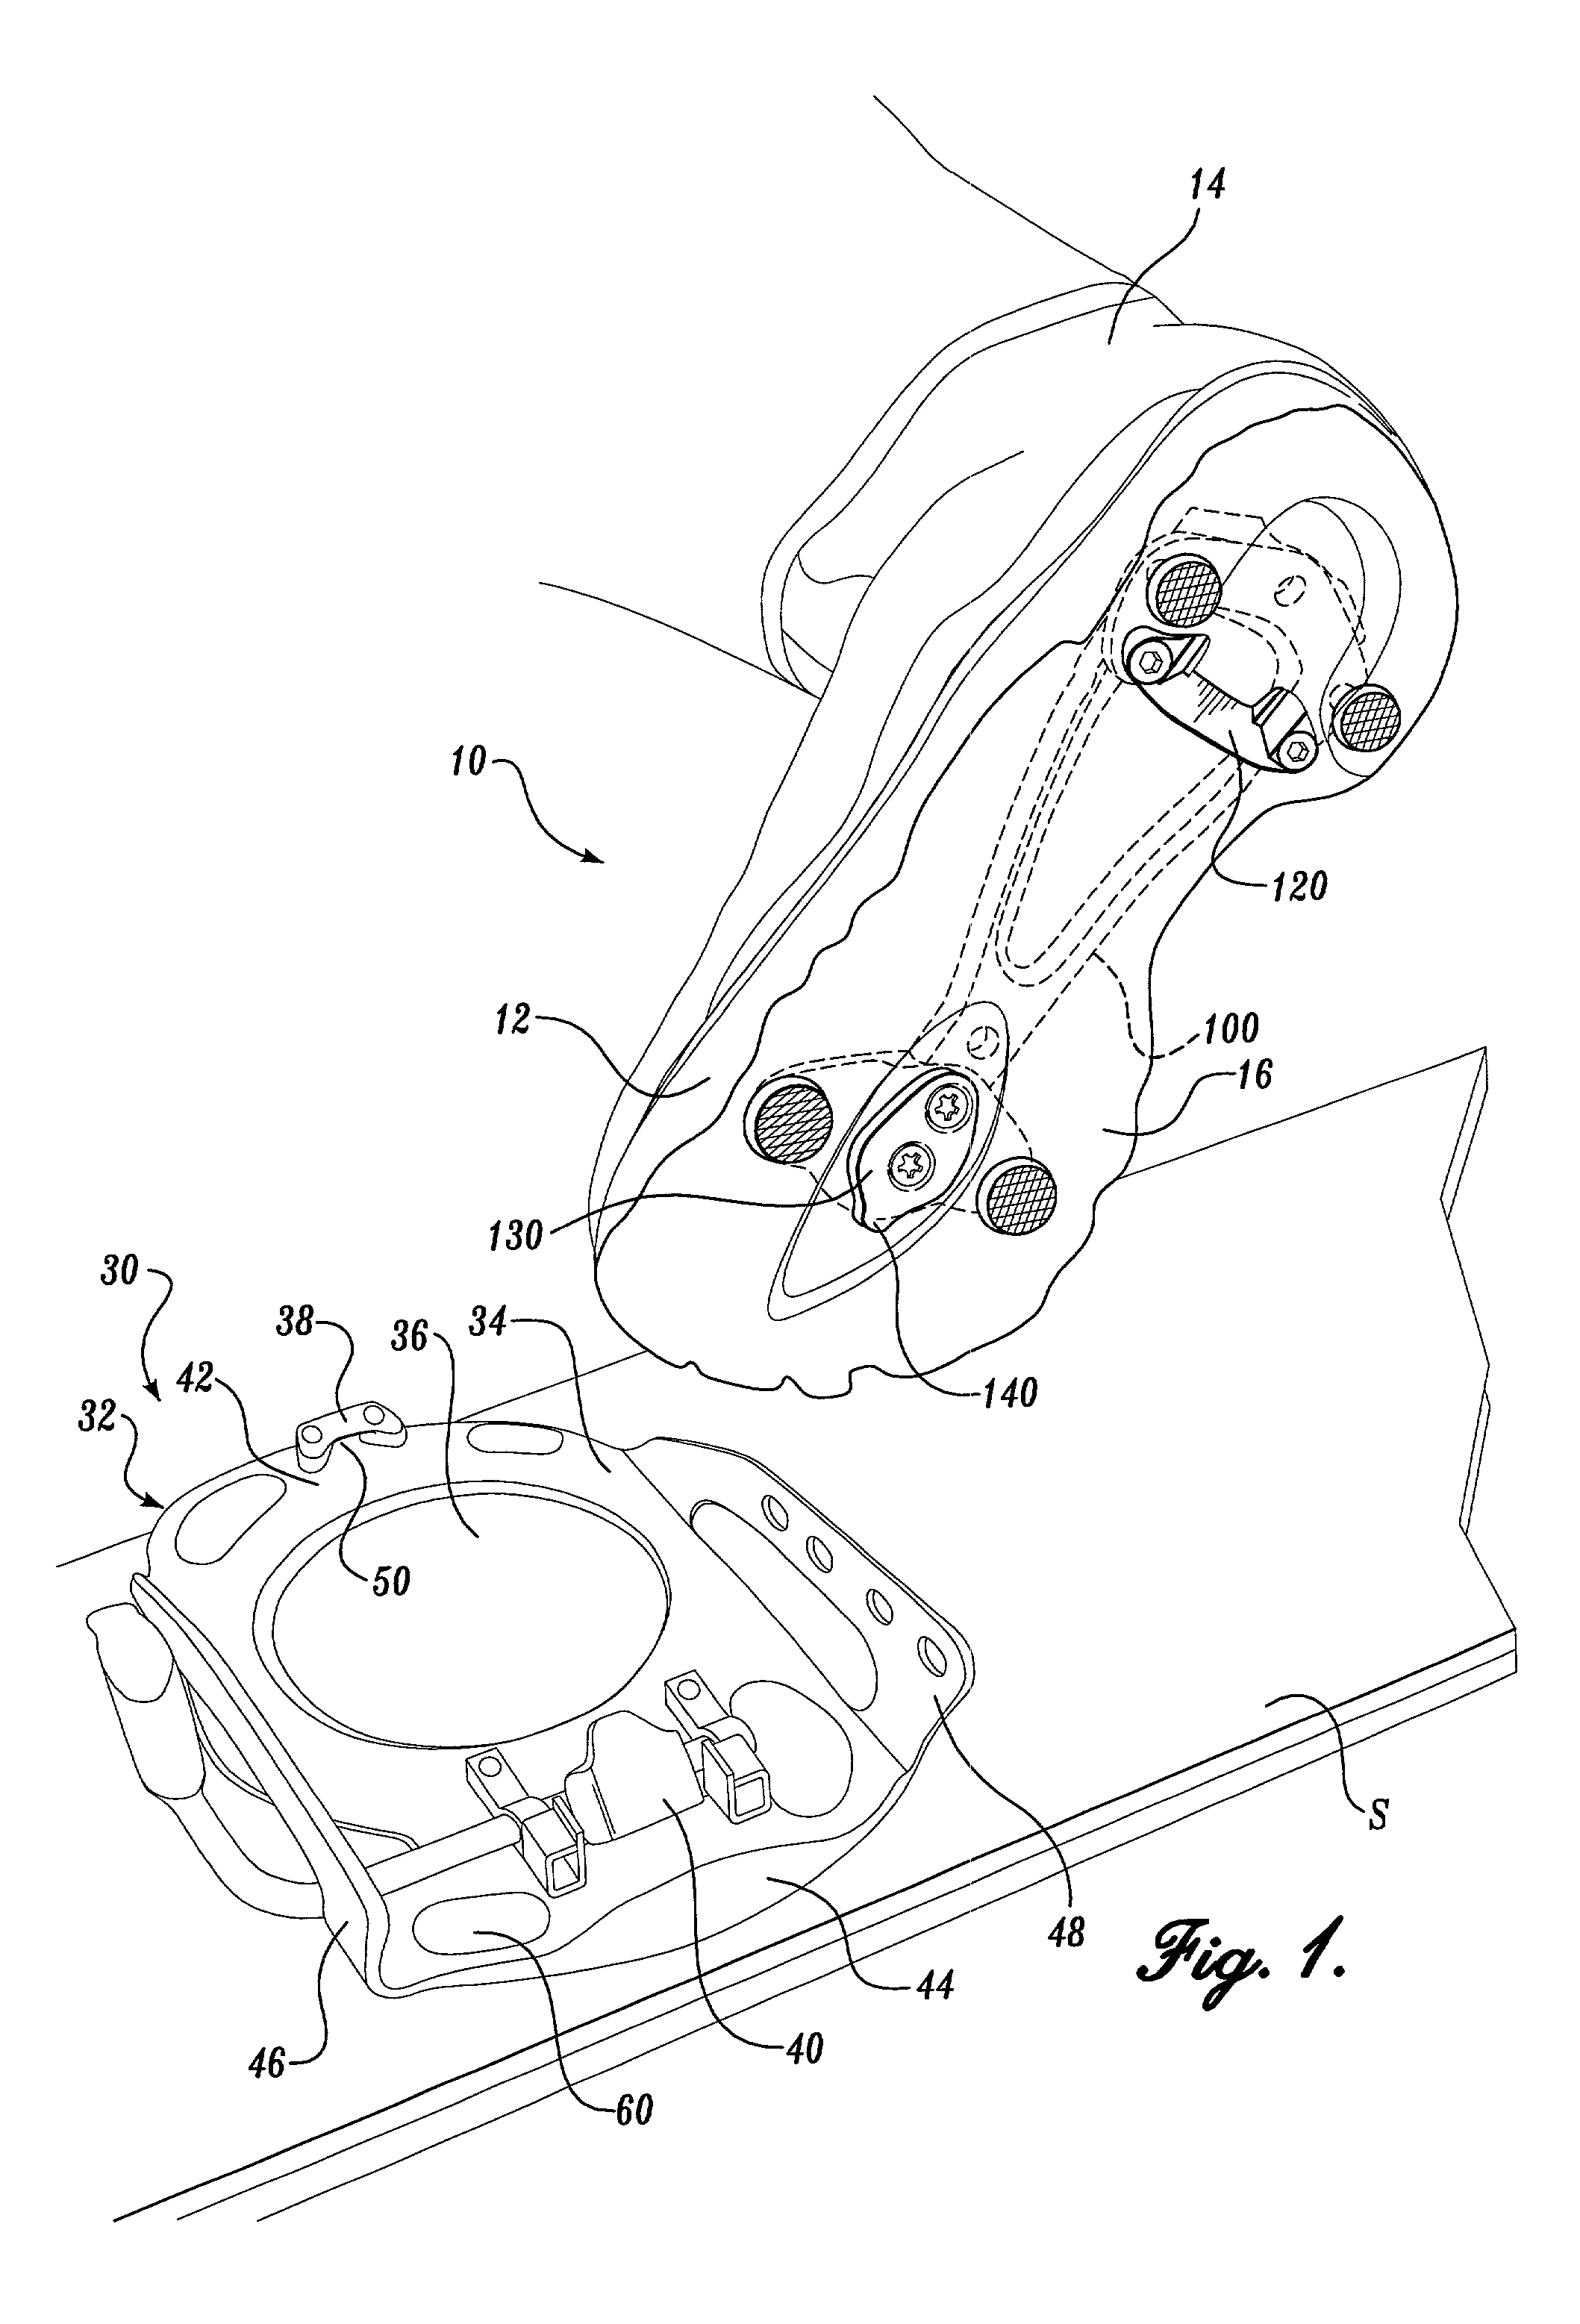 Athletic boot with interface adjustment mechanism